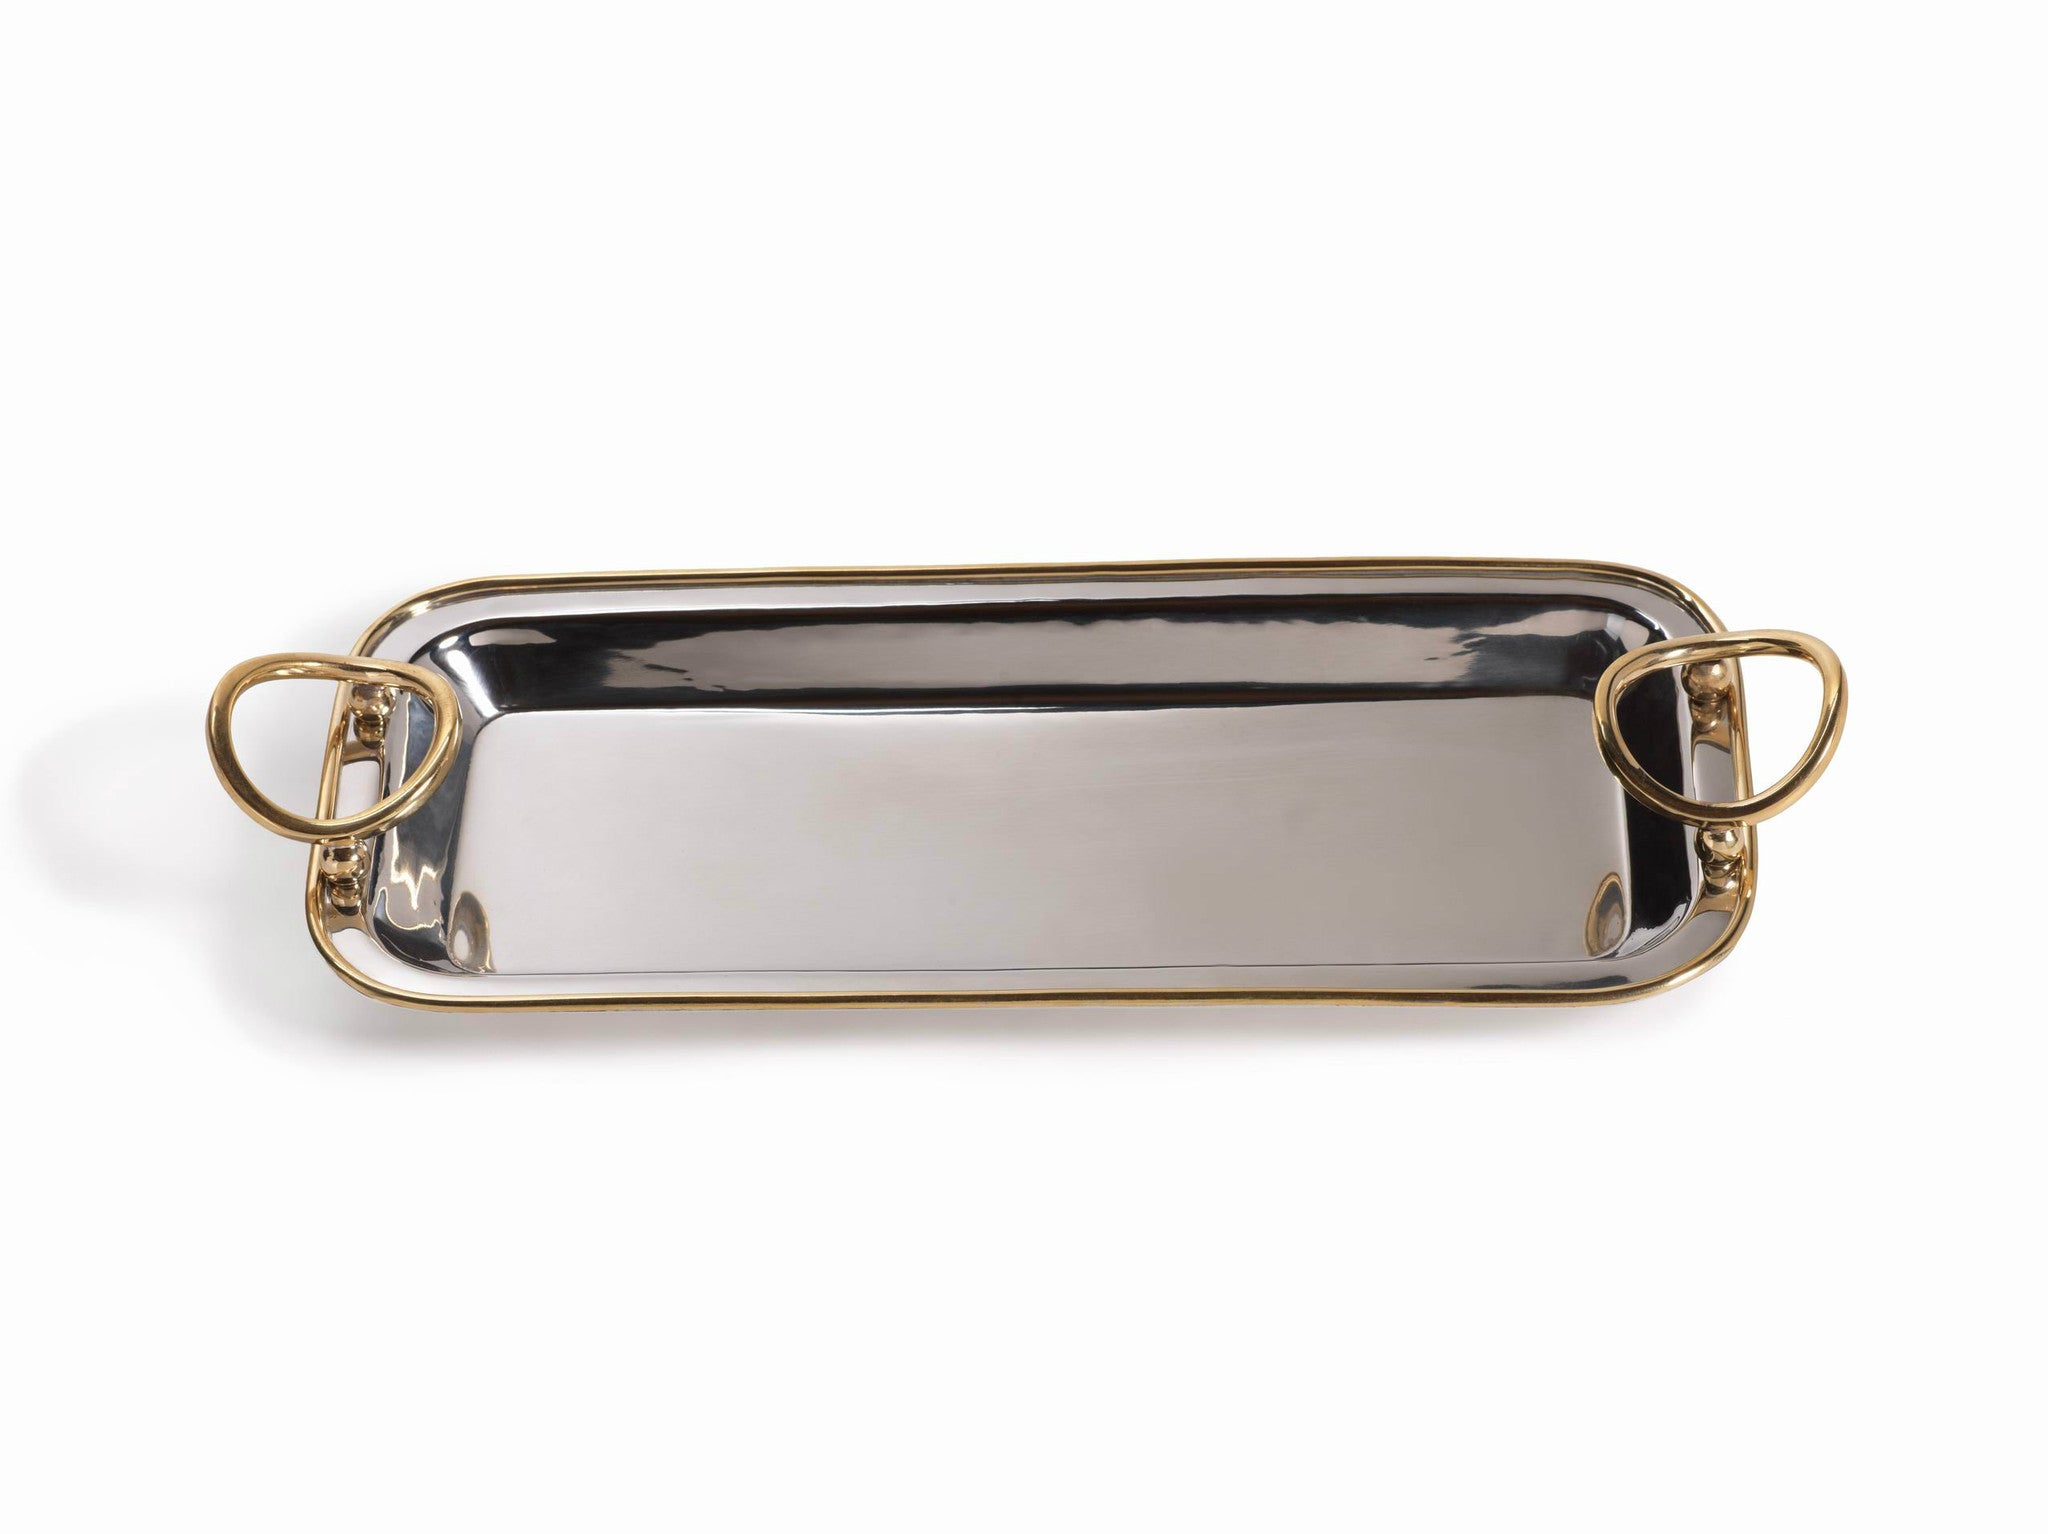 Polished Nickel & Gold Precious Long Trays - CARLYLE AVENUE